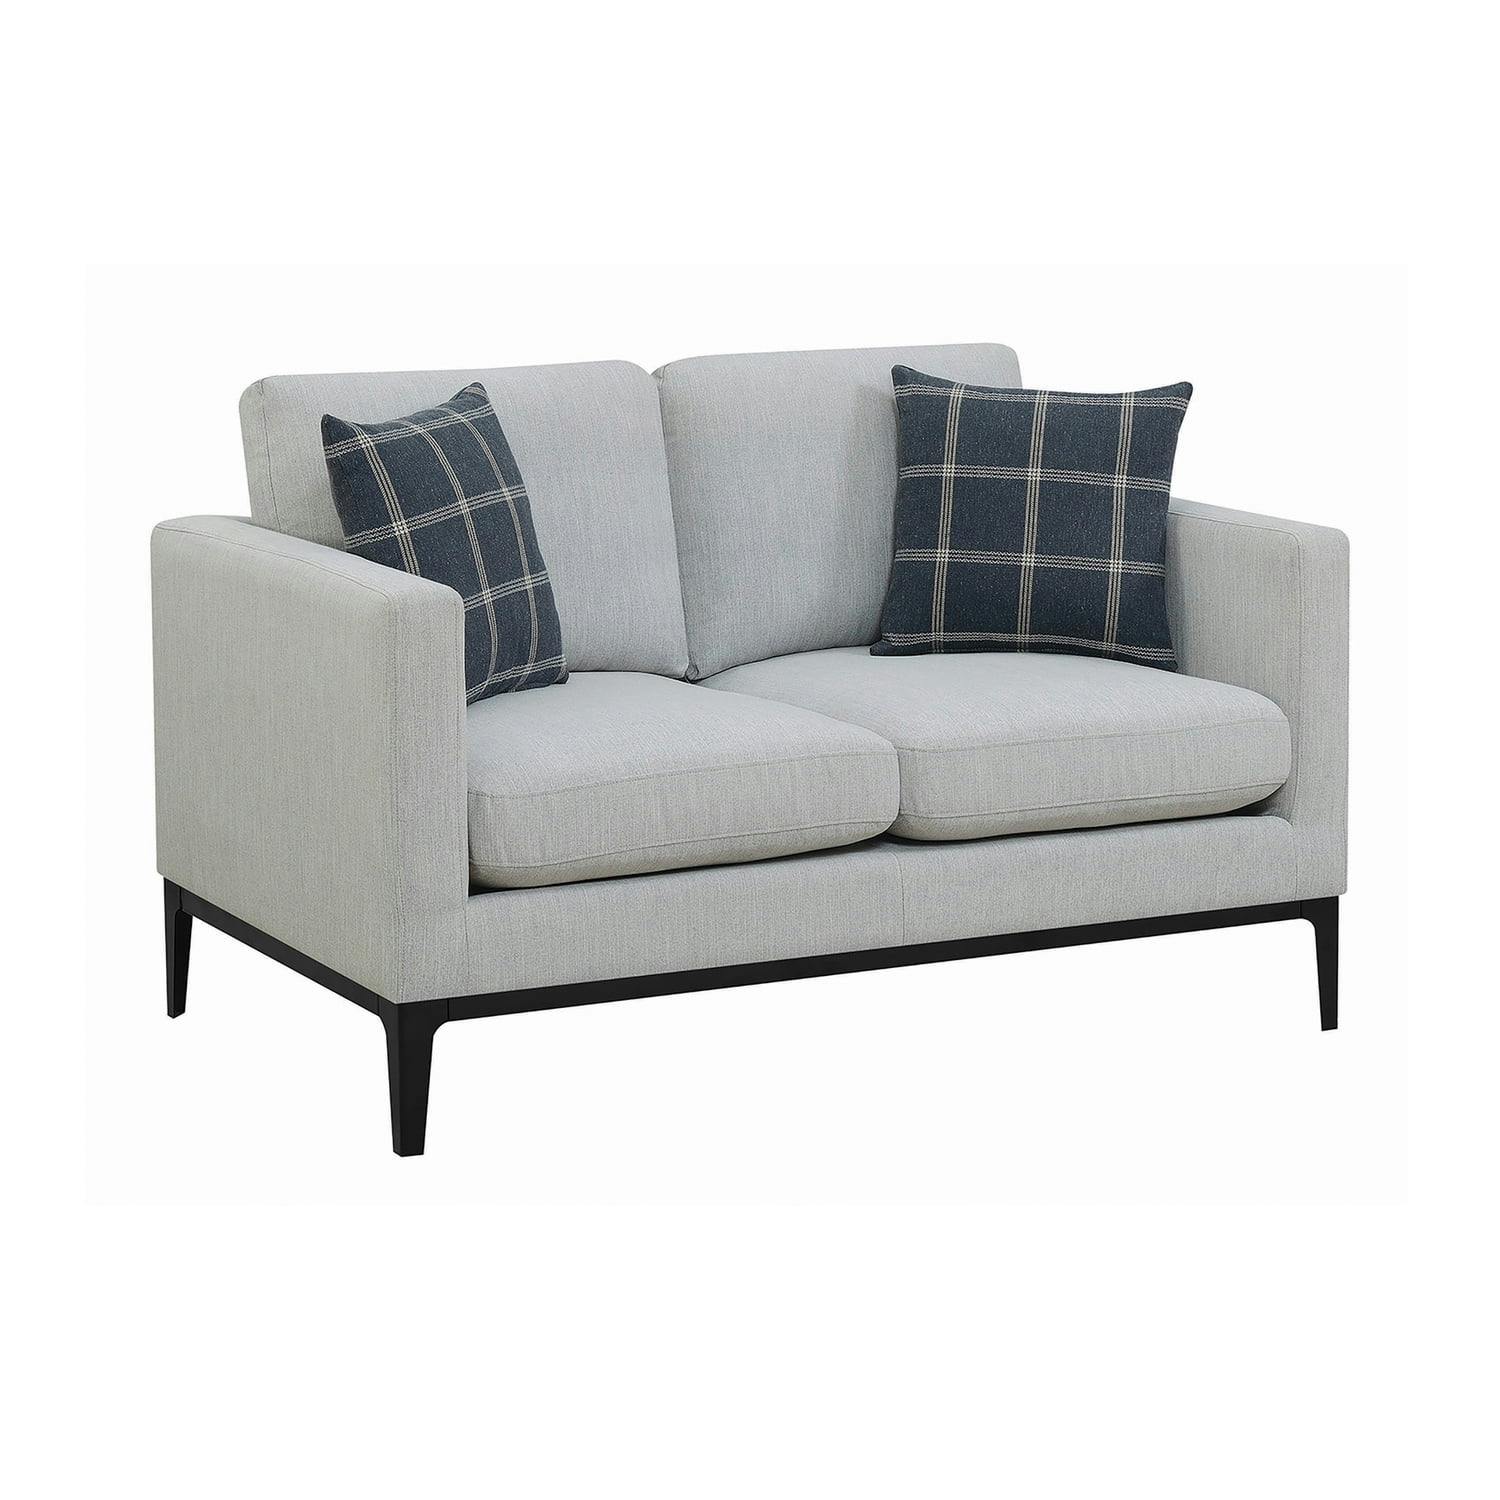 Apperson 56" Gray Linen and Wood Transitional Loveseat with Plaid Pillows